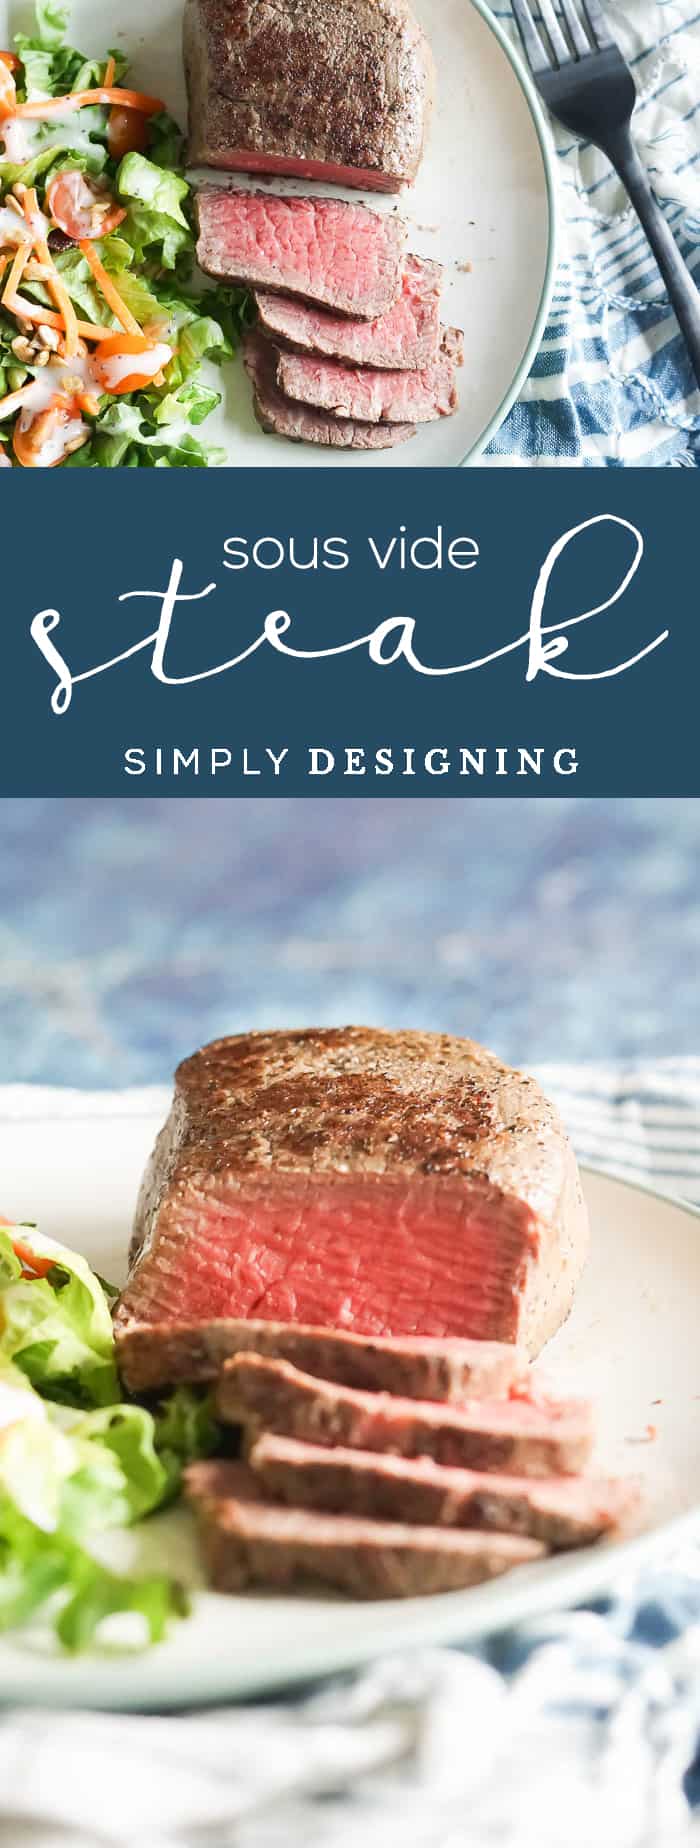 How to Sous Vide Steak - how to cook a perfect steak every time